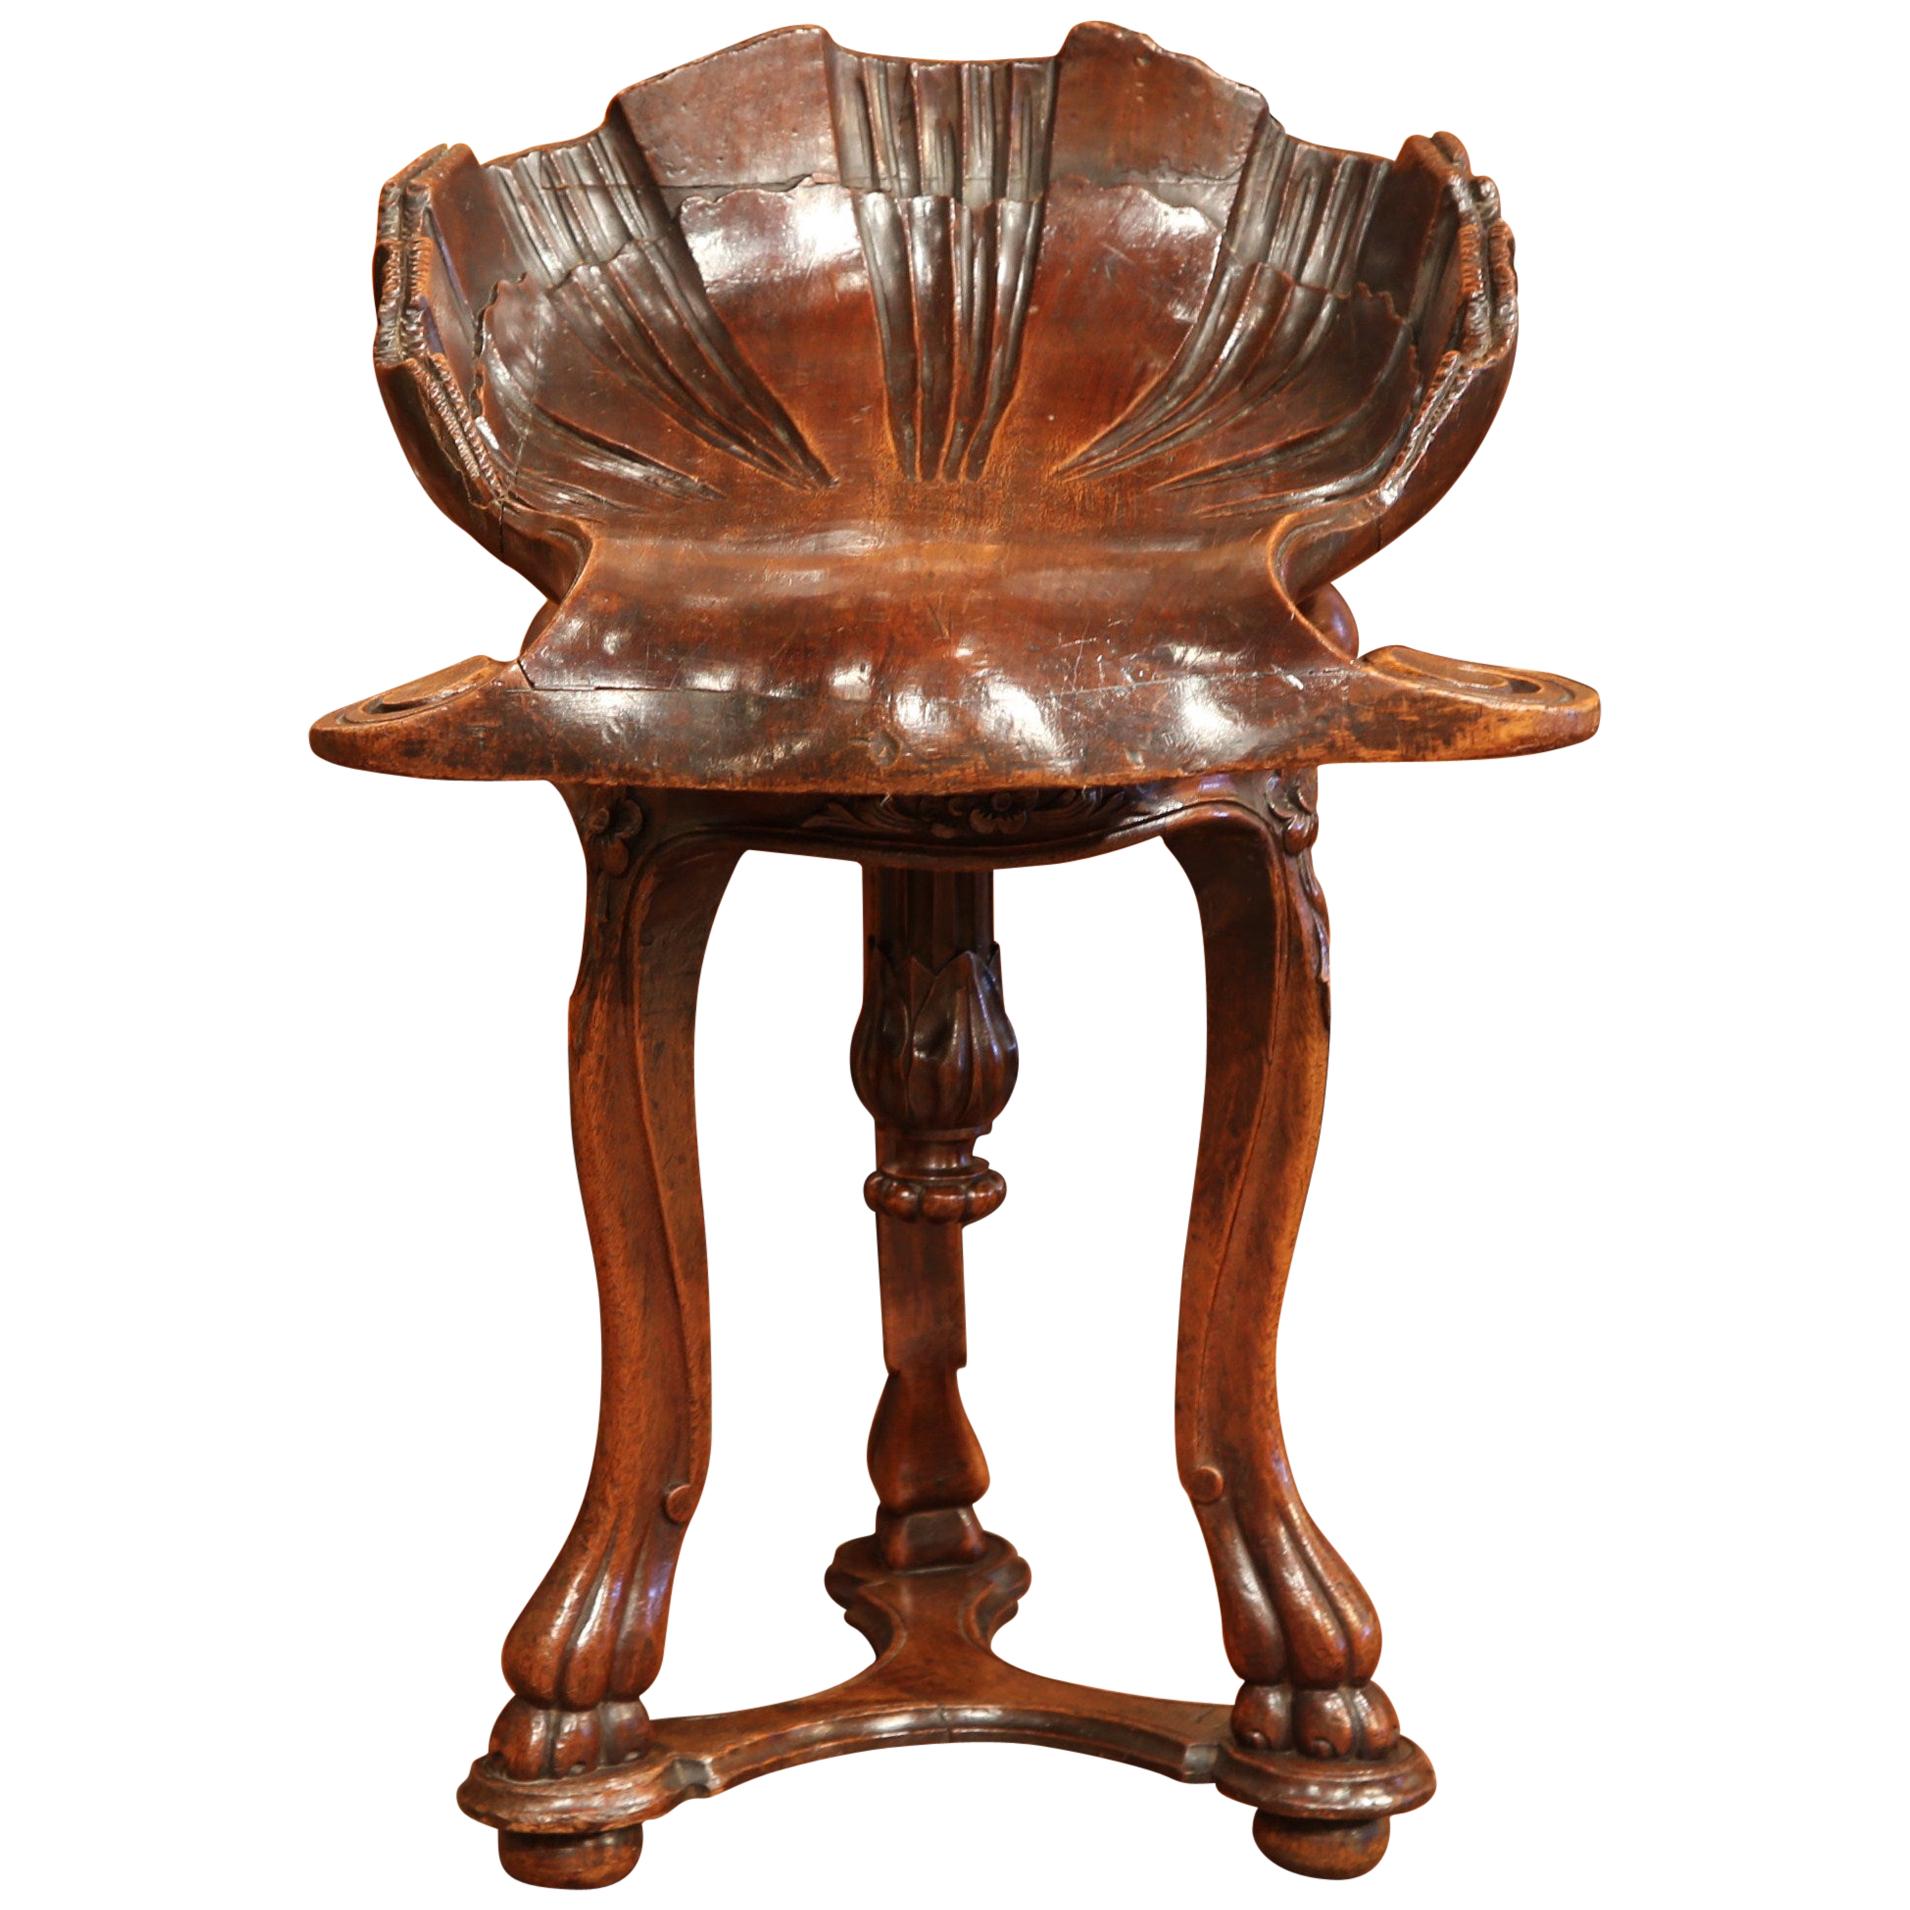 This carved antique fruitwood grotto stool was created in France, circa 1850. Perfect as a piano stool or simply a statement piece, the bench, stands on cabriole legs joined with bottom stretcher, and bun feet reminiscent of animal paws. The seat